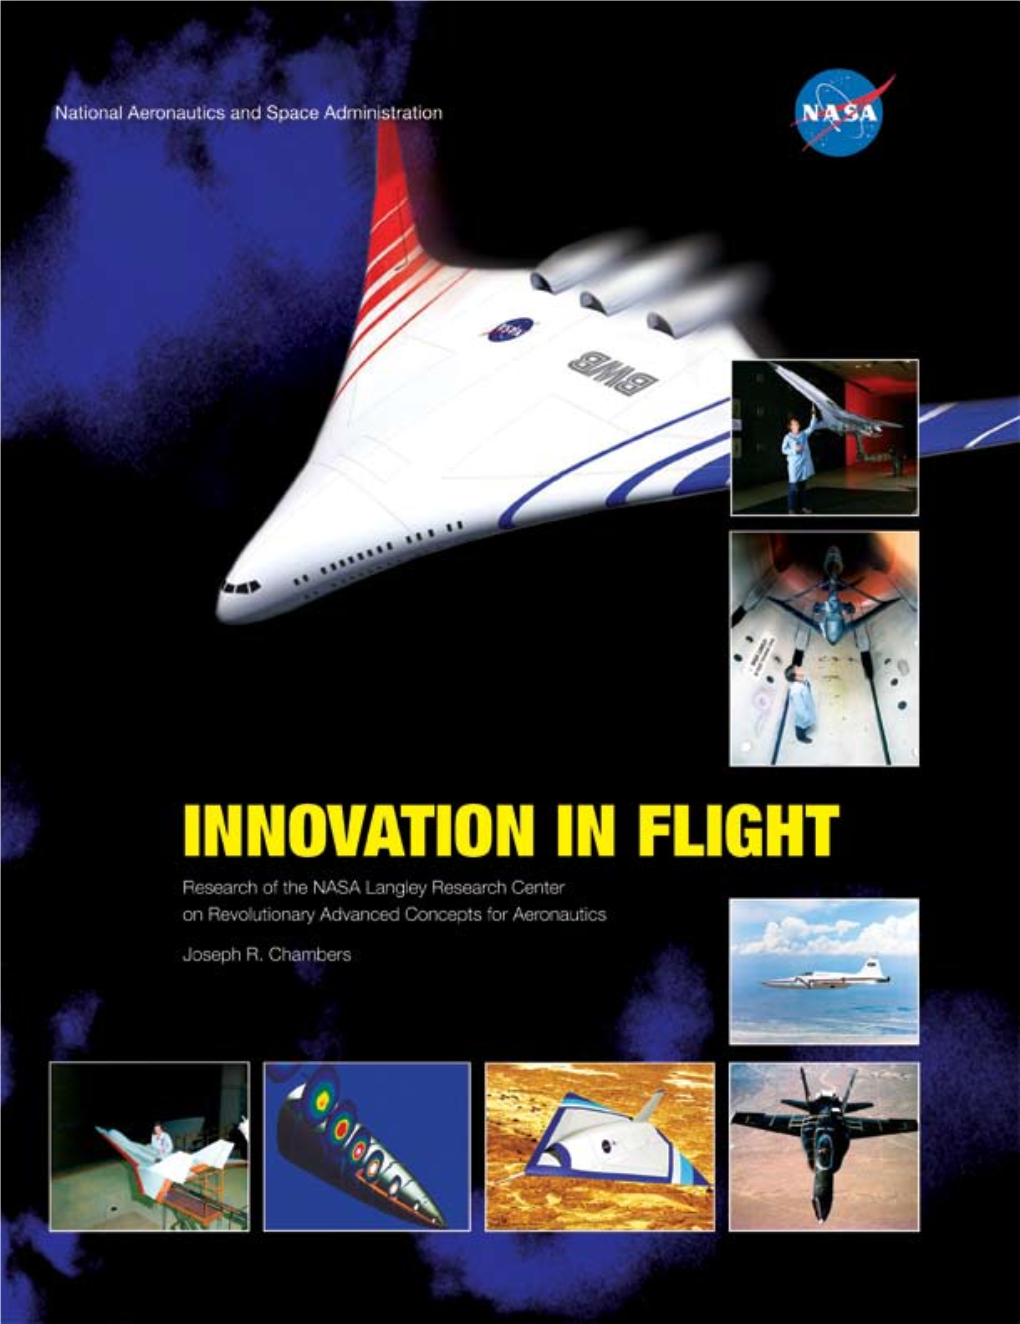 Research of the Nasa Langley Research Center on Revolutionary Advanced Concepts for Aeronautics